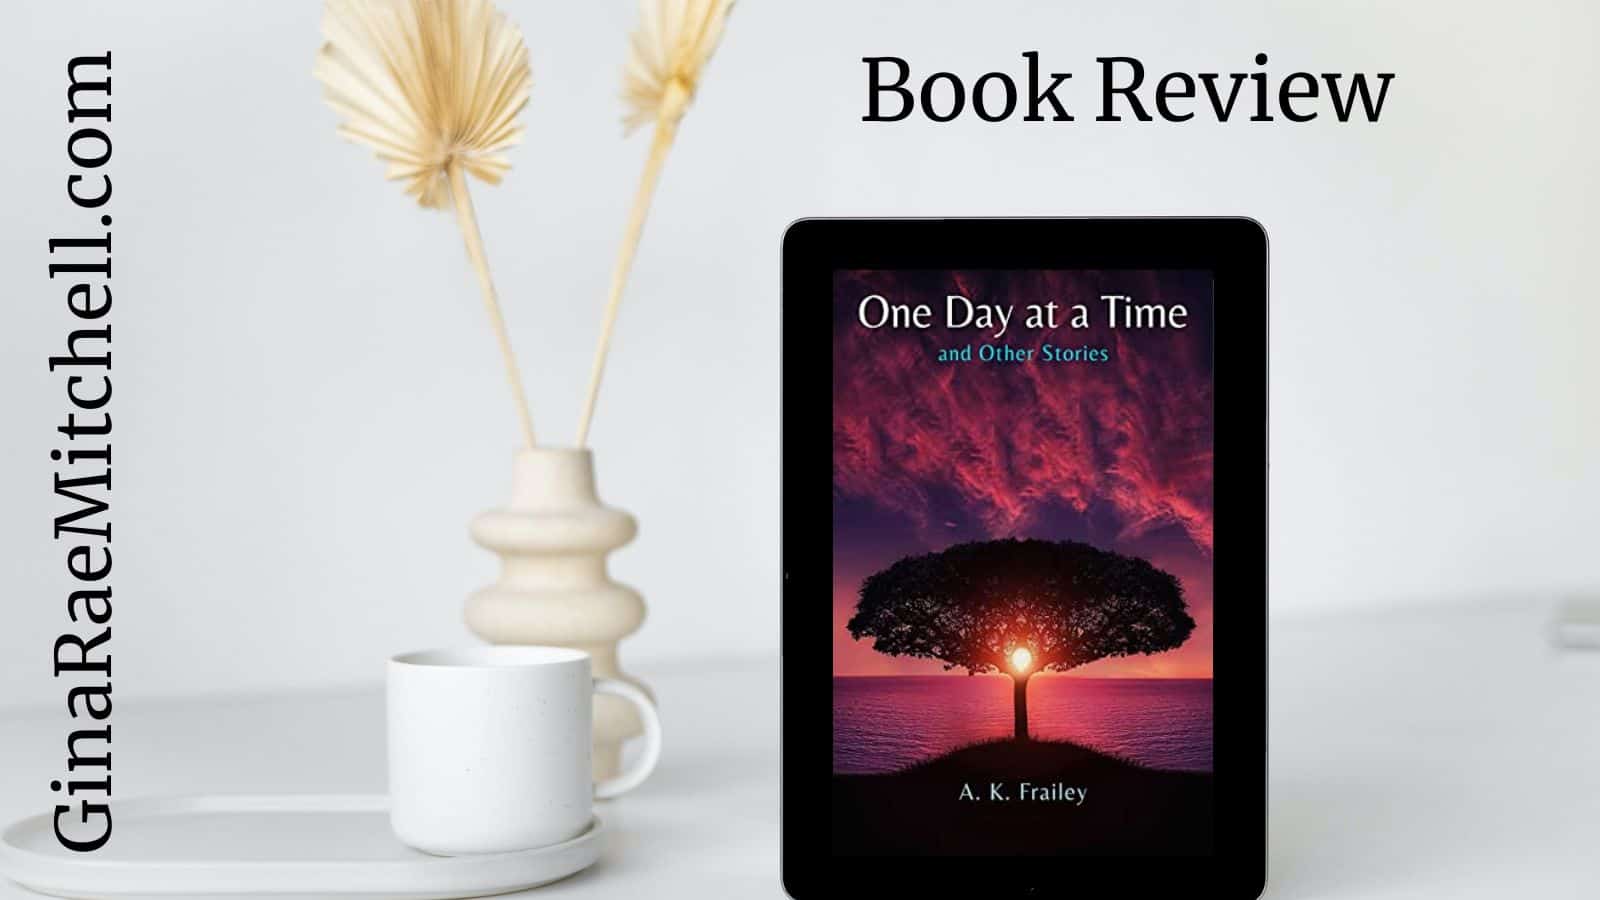 Book Review: One Day at a Time by A.K. Frailey | Short Story Collection ~ Must-Read 5-Star Family Fiction